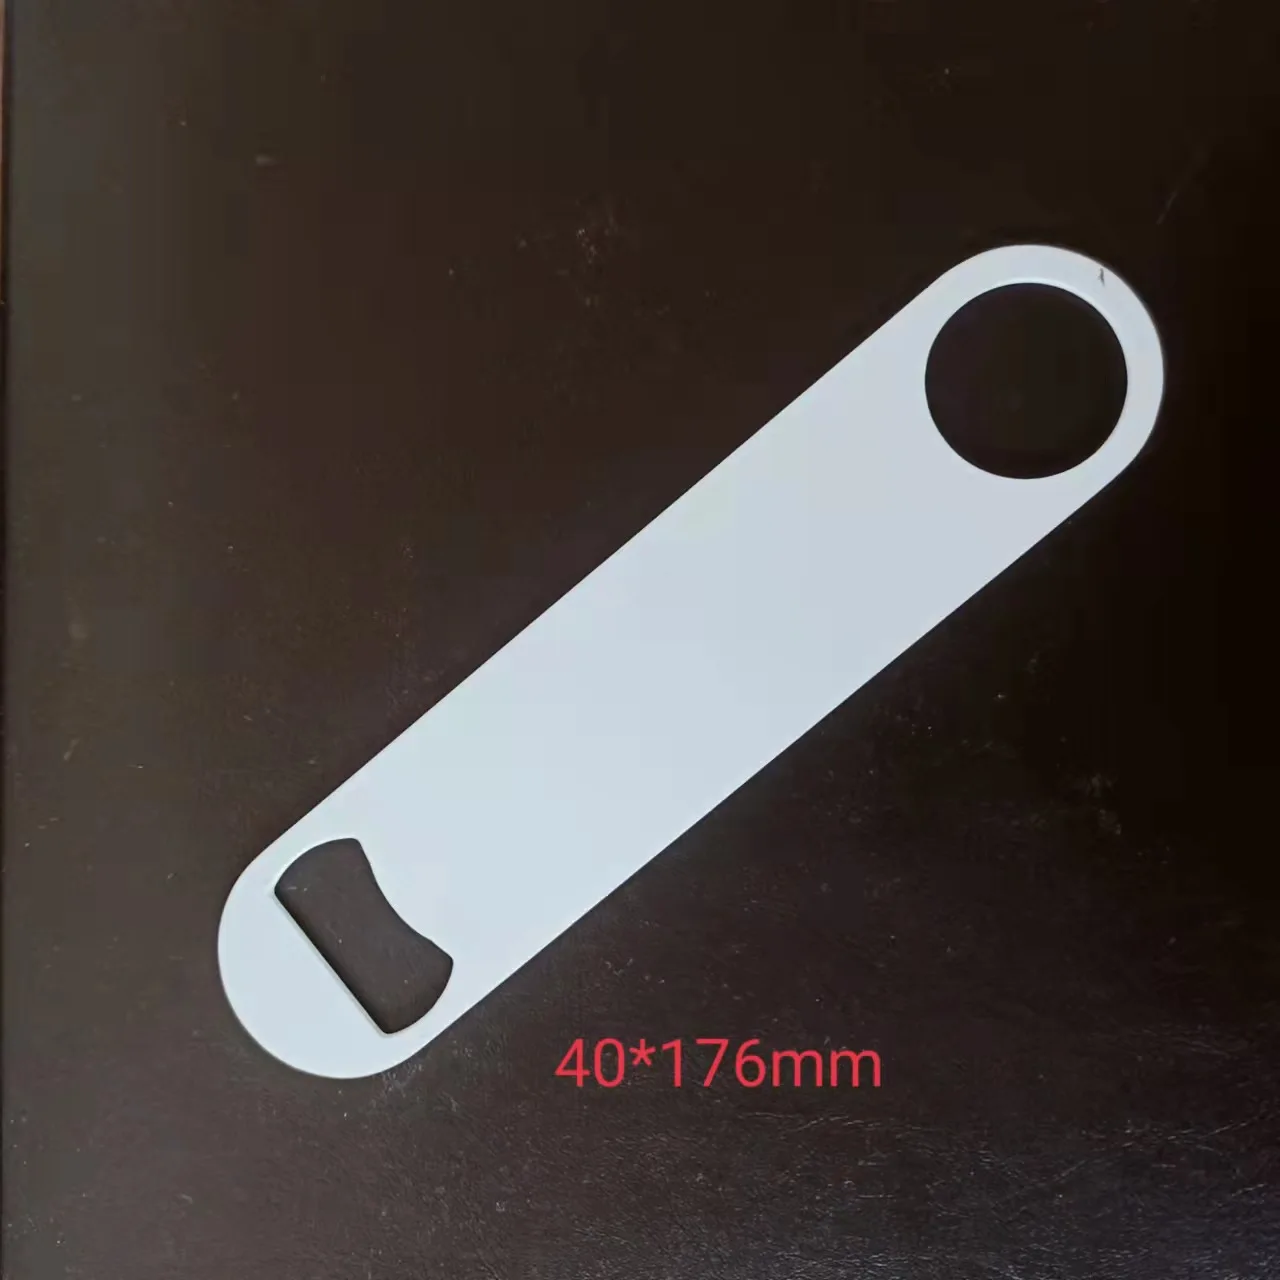 Factory Price!!! 100pcs/lot Bottle Beer Opener Cap Lifter Sublimation Blank White Dye INK Printing Heat Transfer High Quality factory price 50pcs lot bottle beer opener sublimation blank silver for dye ink printing